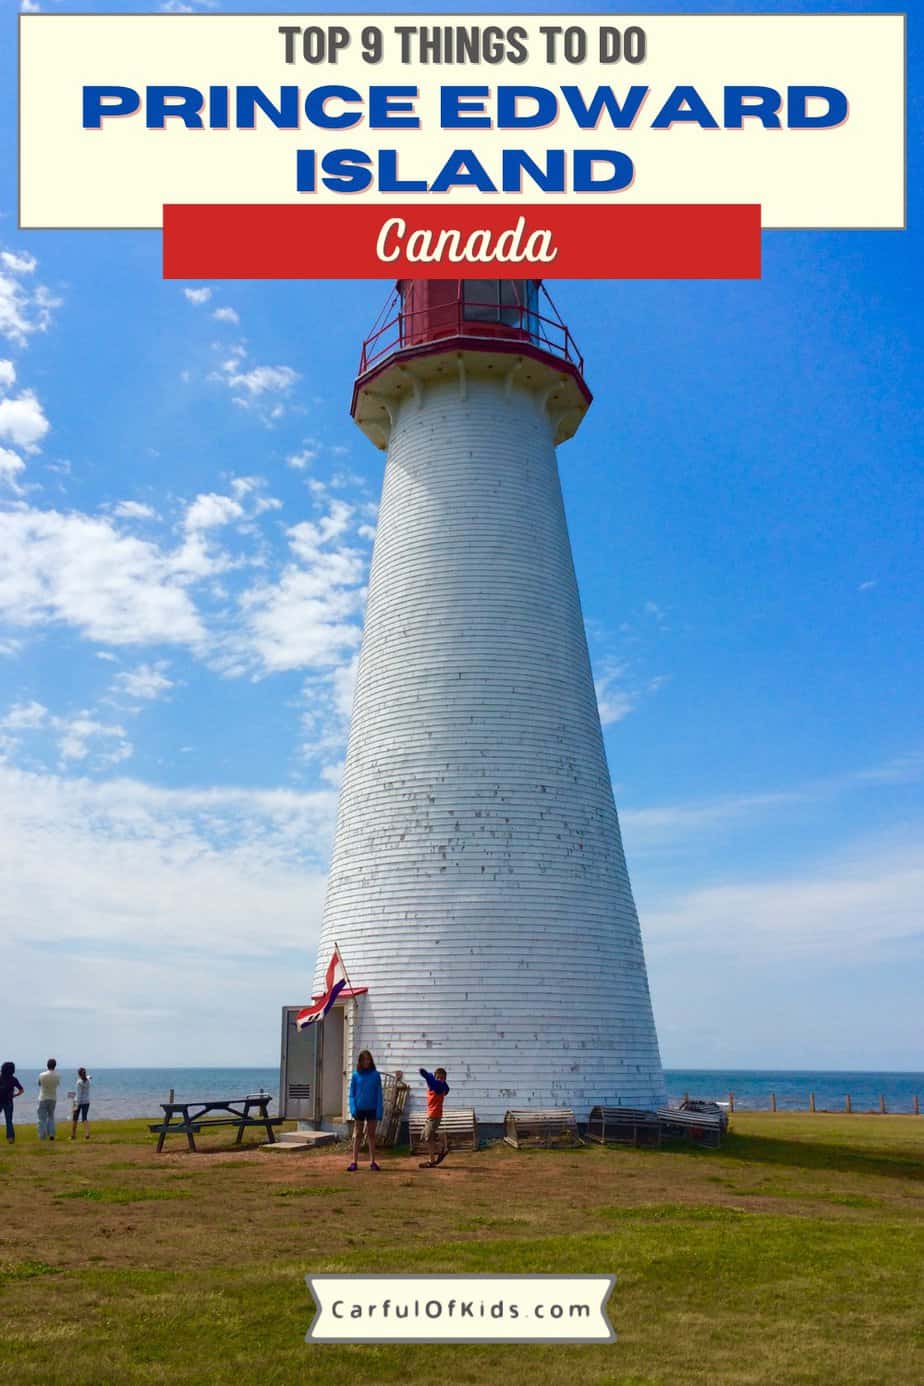 Explore Prince Edward Island with your family for lighthouses, clamming and Canadian history. Along with learning more about the famous red-headed Anne of Green Gables in the Canadian Maritimes. Top Things to do on Prince Edward Island #Canada #PEI 